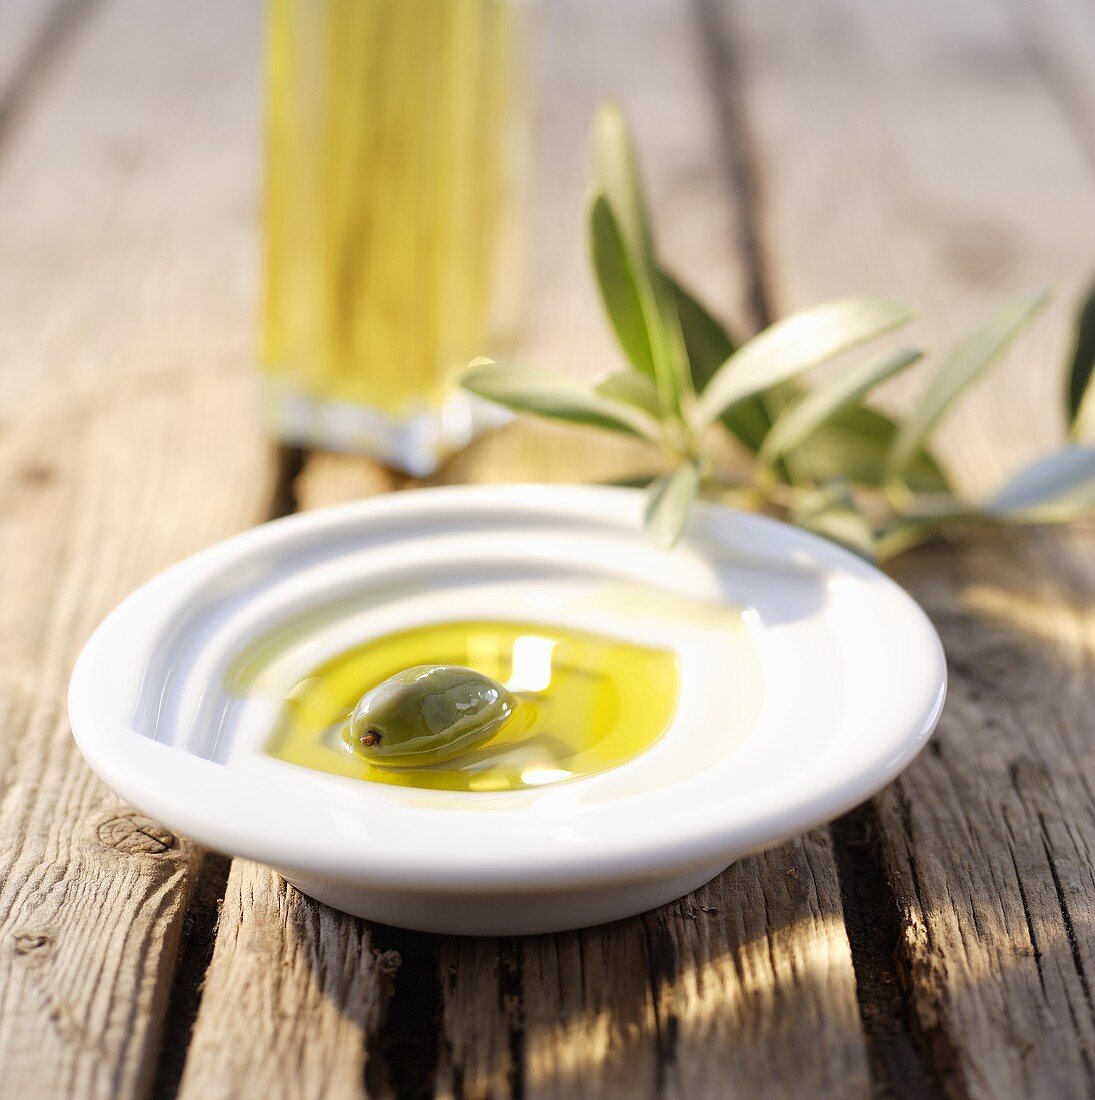 Small dish of olive oil with green olive